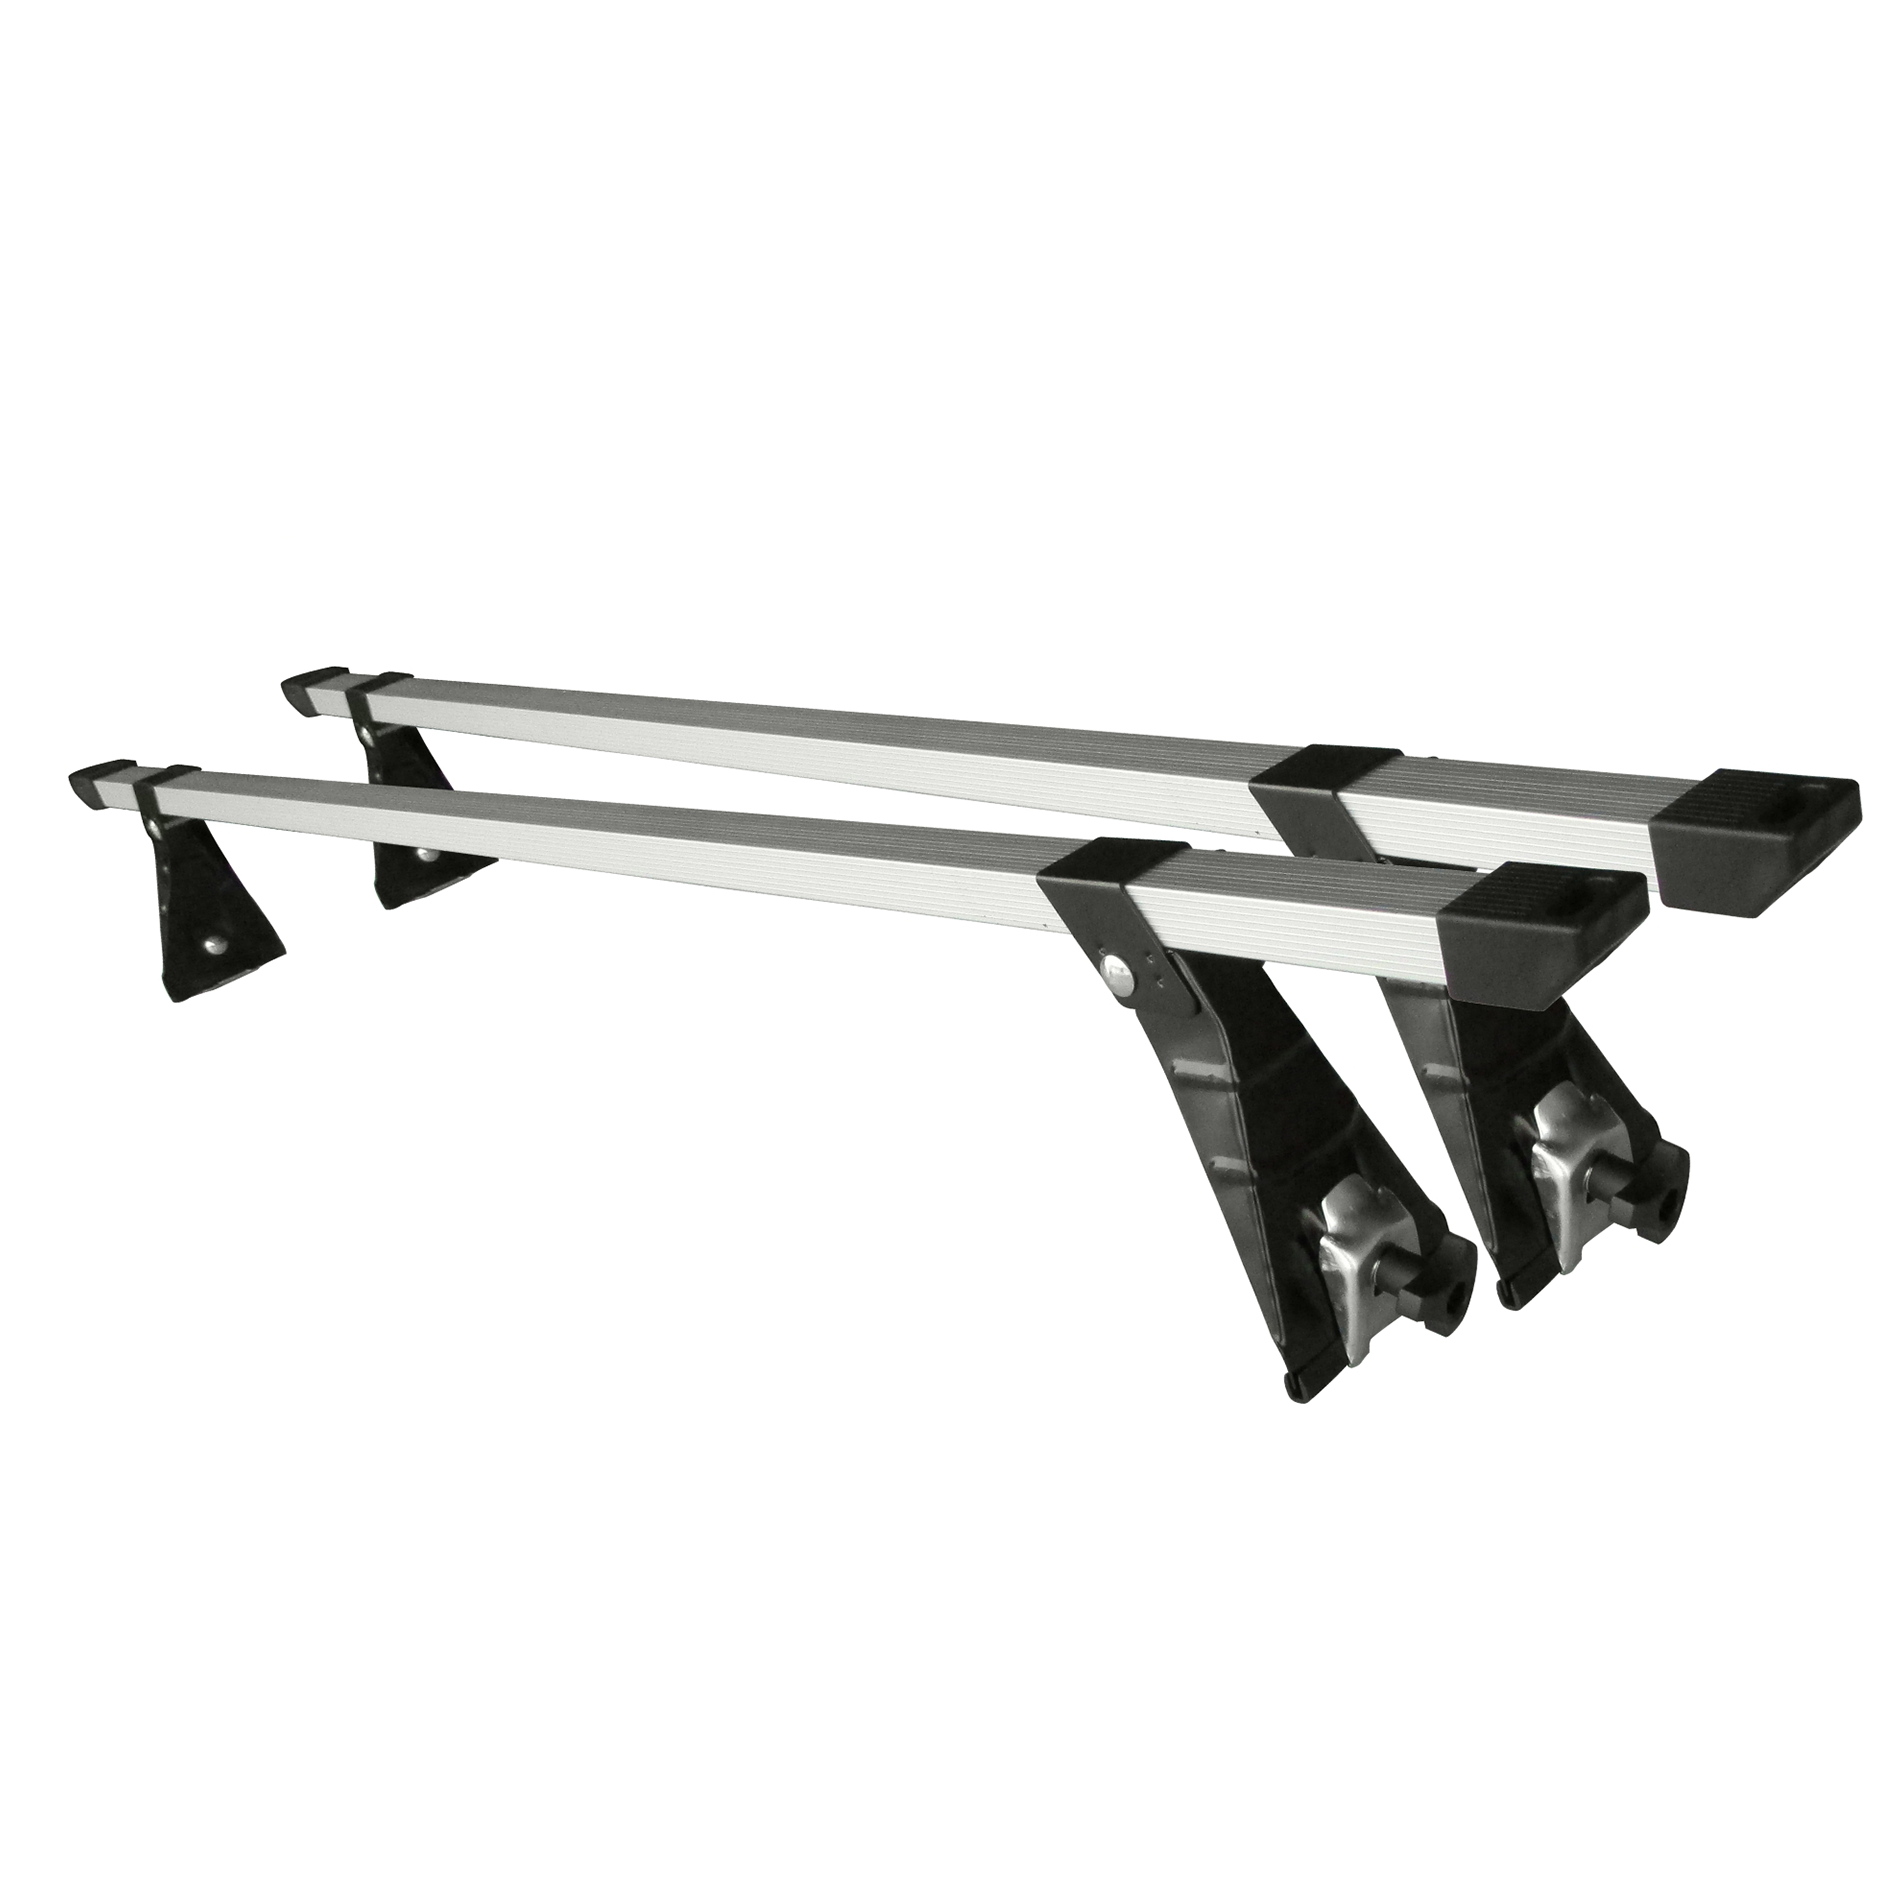 Aluminum Roof Bar for car with channel gutters QEE Rack Loading Max. 70kgs.